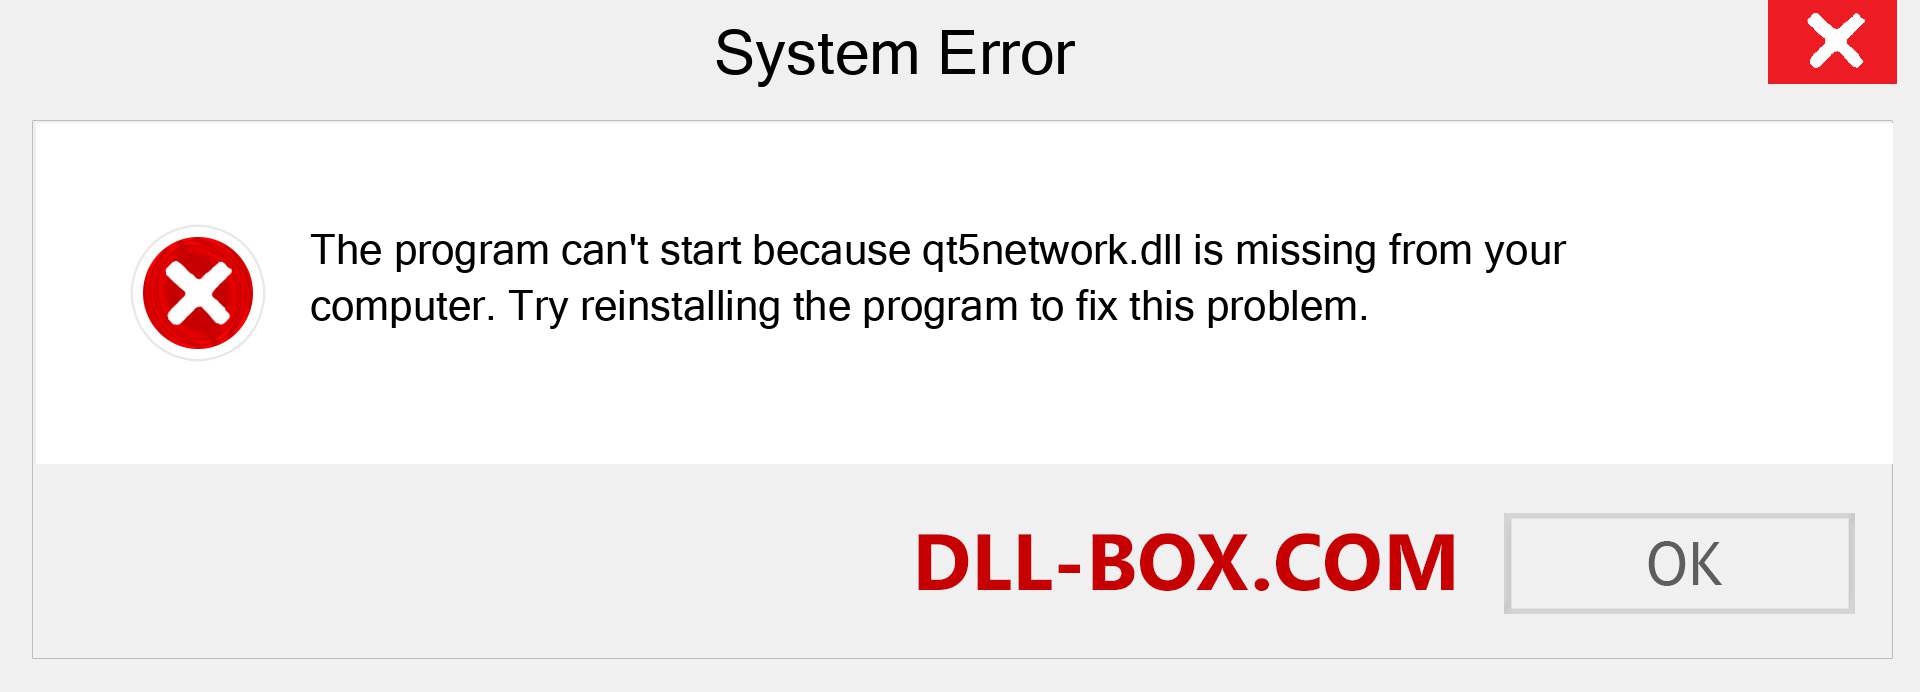  qt5network.dll file is missing?. Download for Windows 7, 8, 10 - Fix  qt5network dll Missing Error on Windows, photos, images